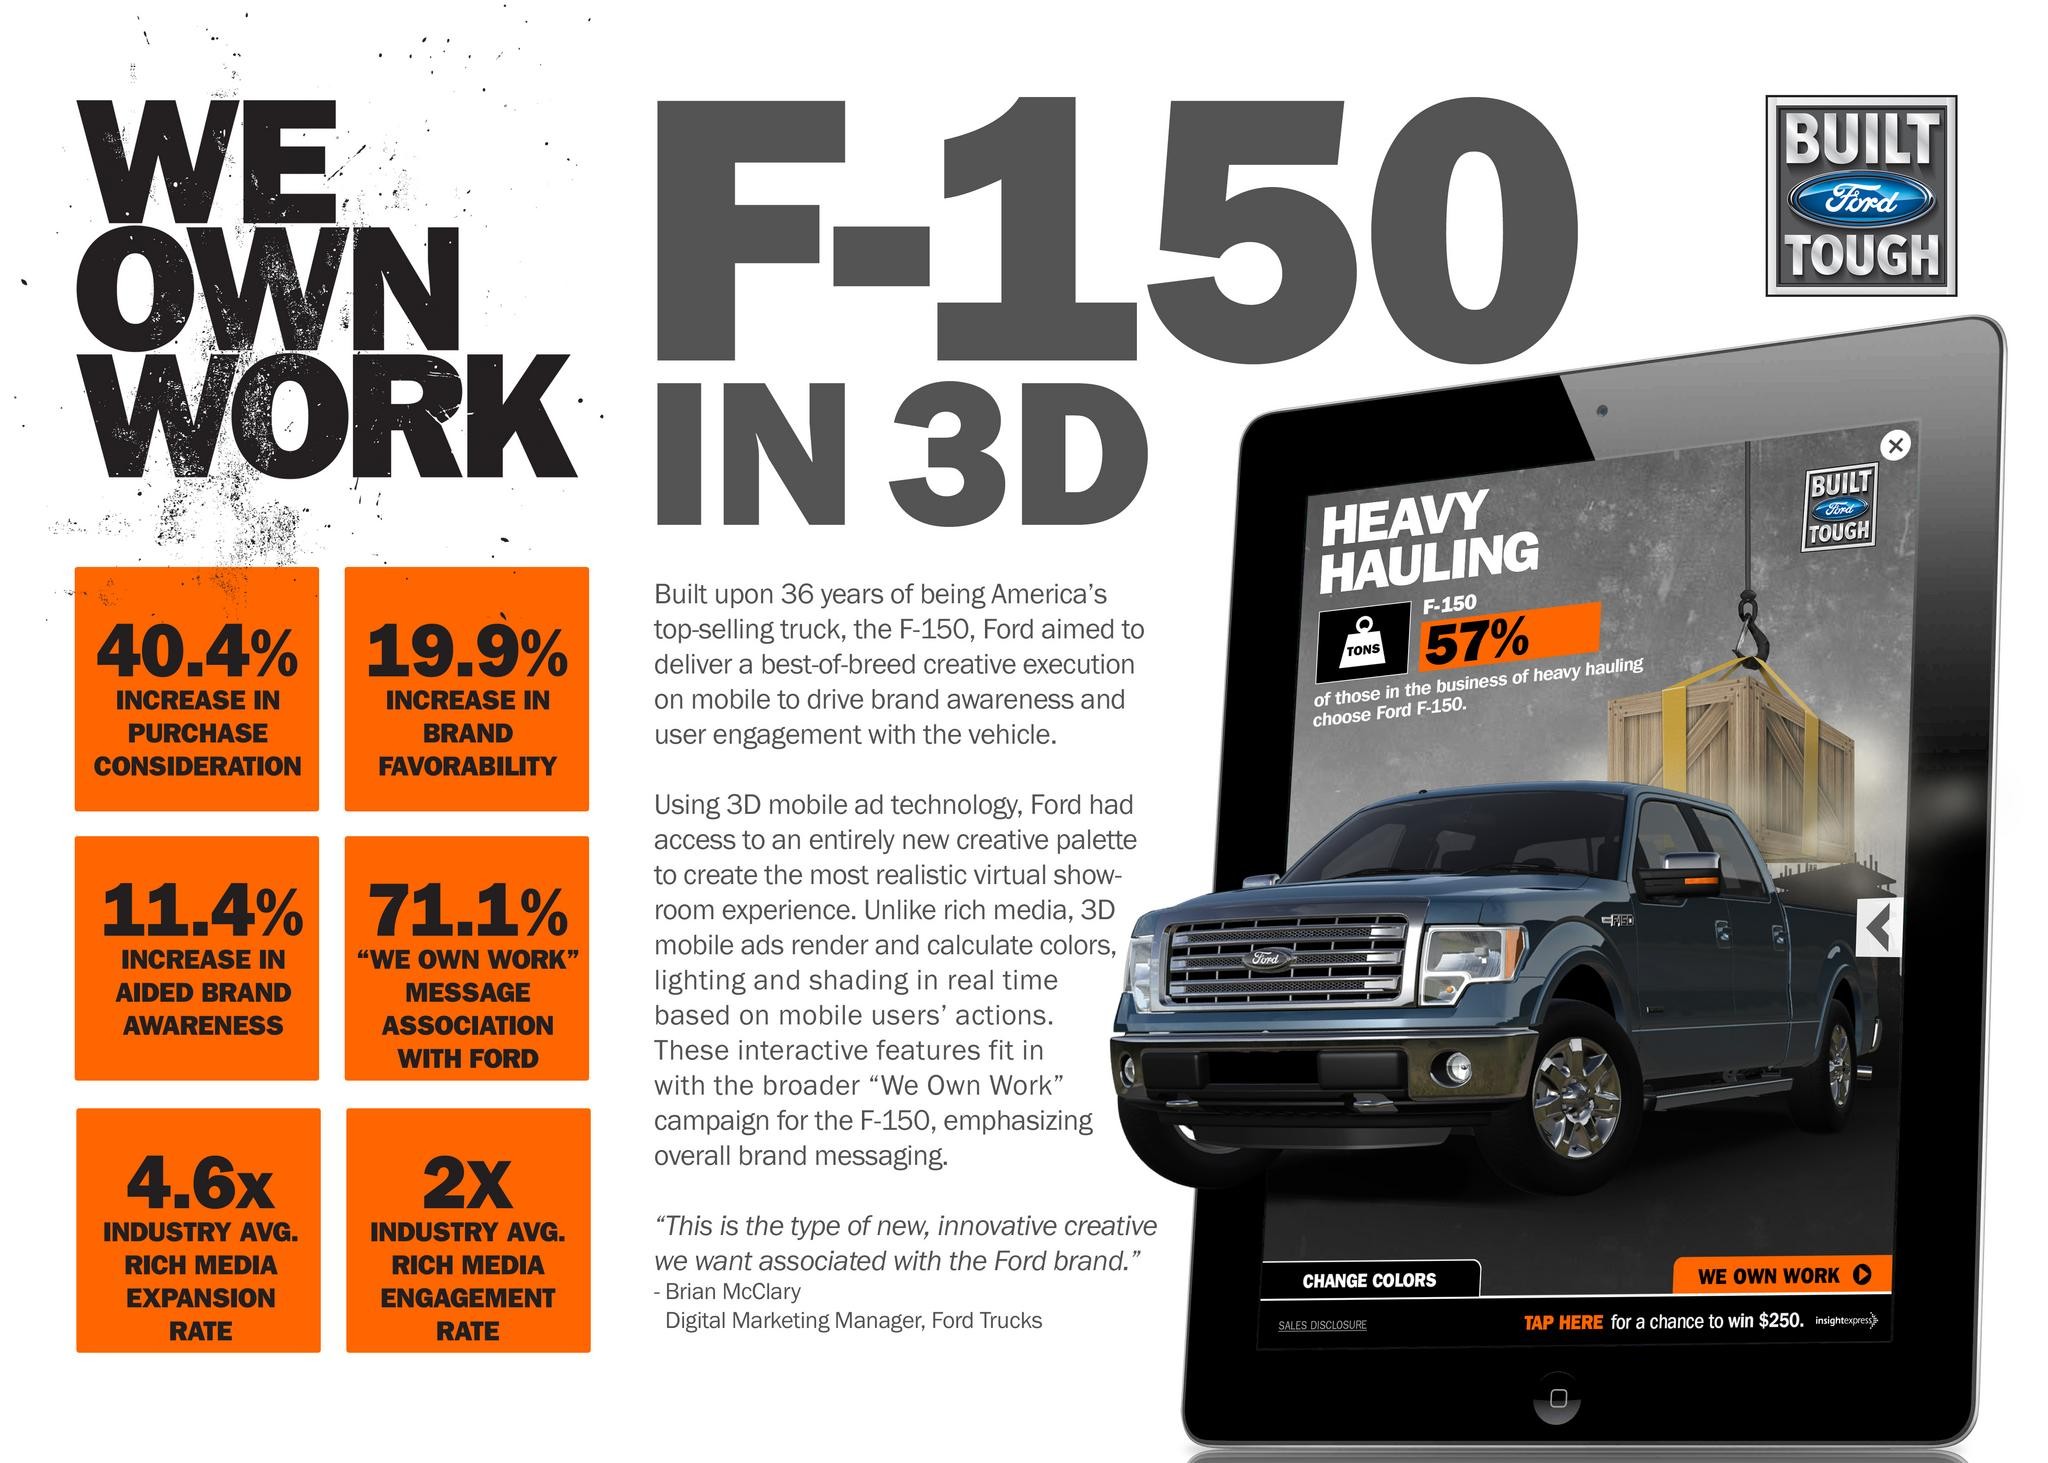 BRINGING THE FORD F-150 TO LIFE IN 3D MOBILE AD EXPERIENCE